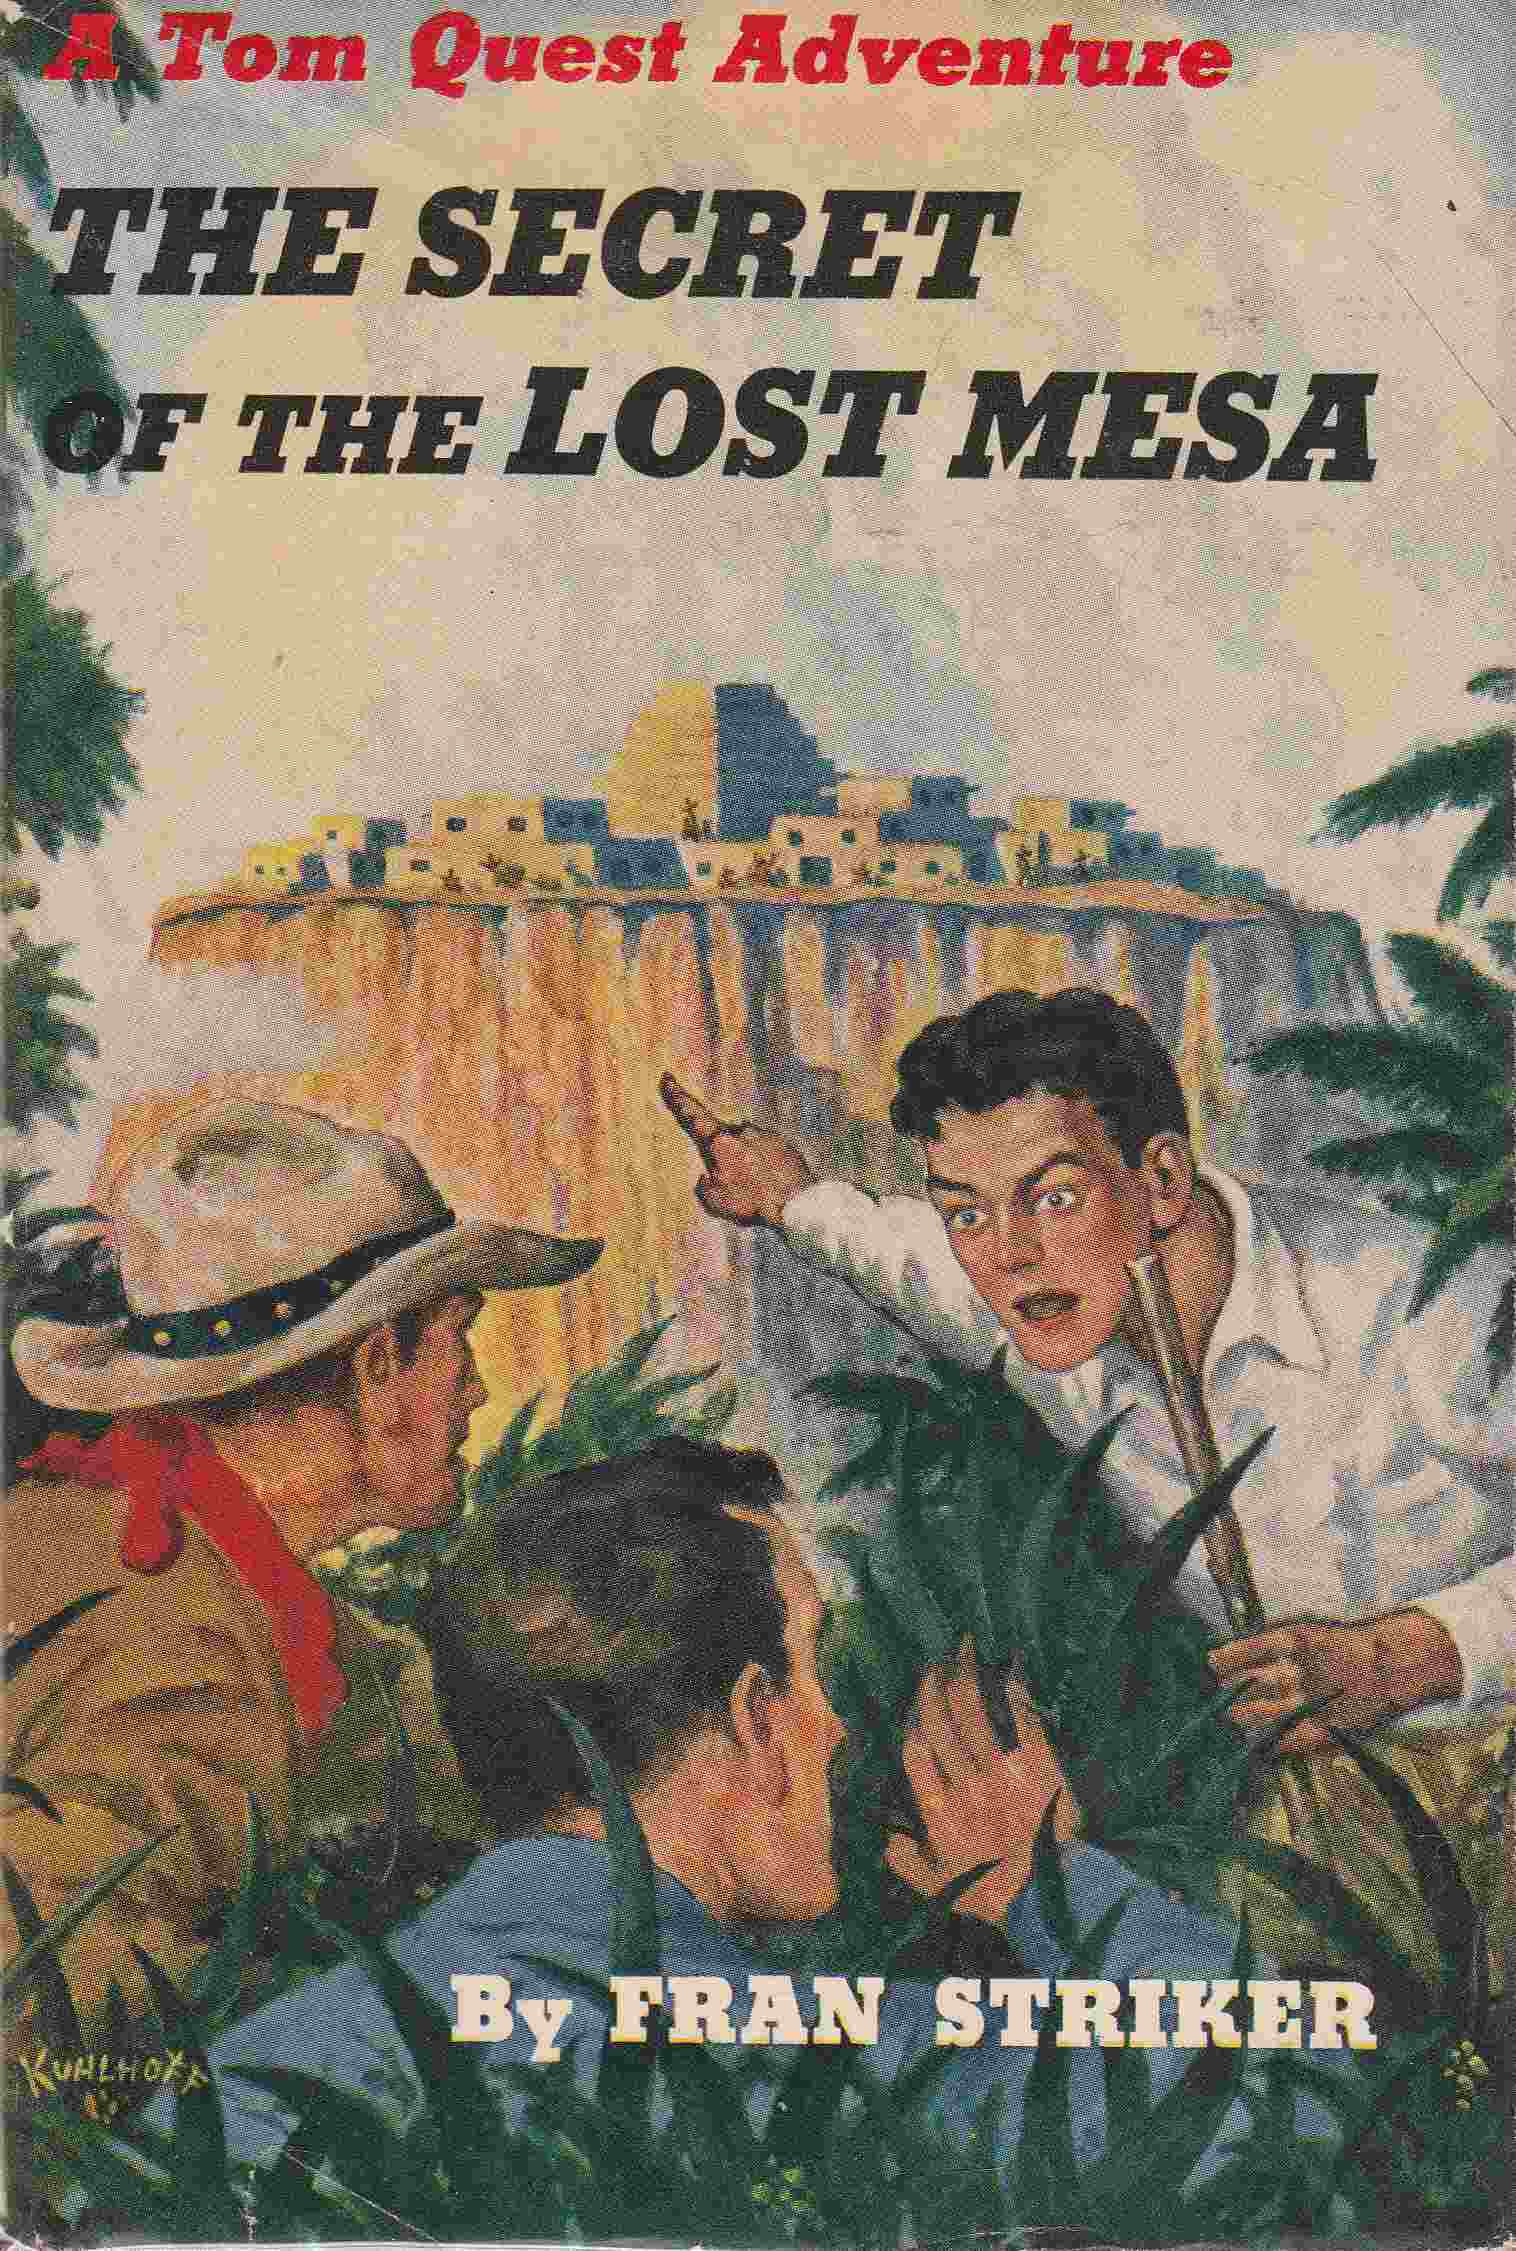 The Secret of the Lost Mesa